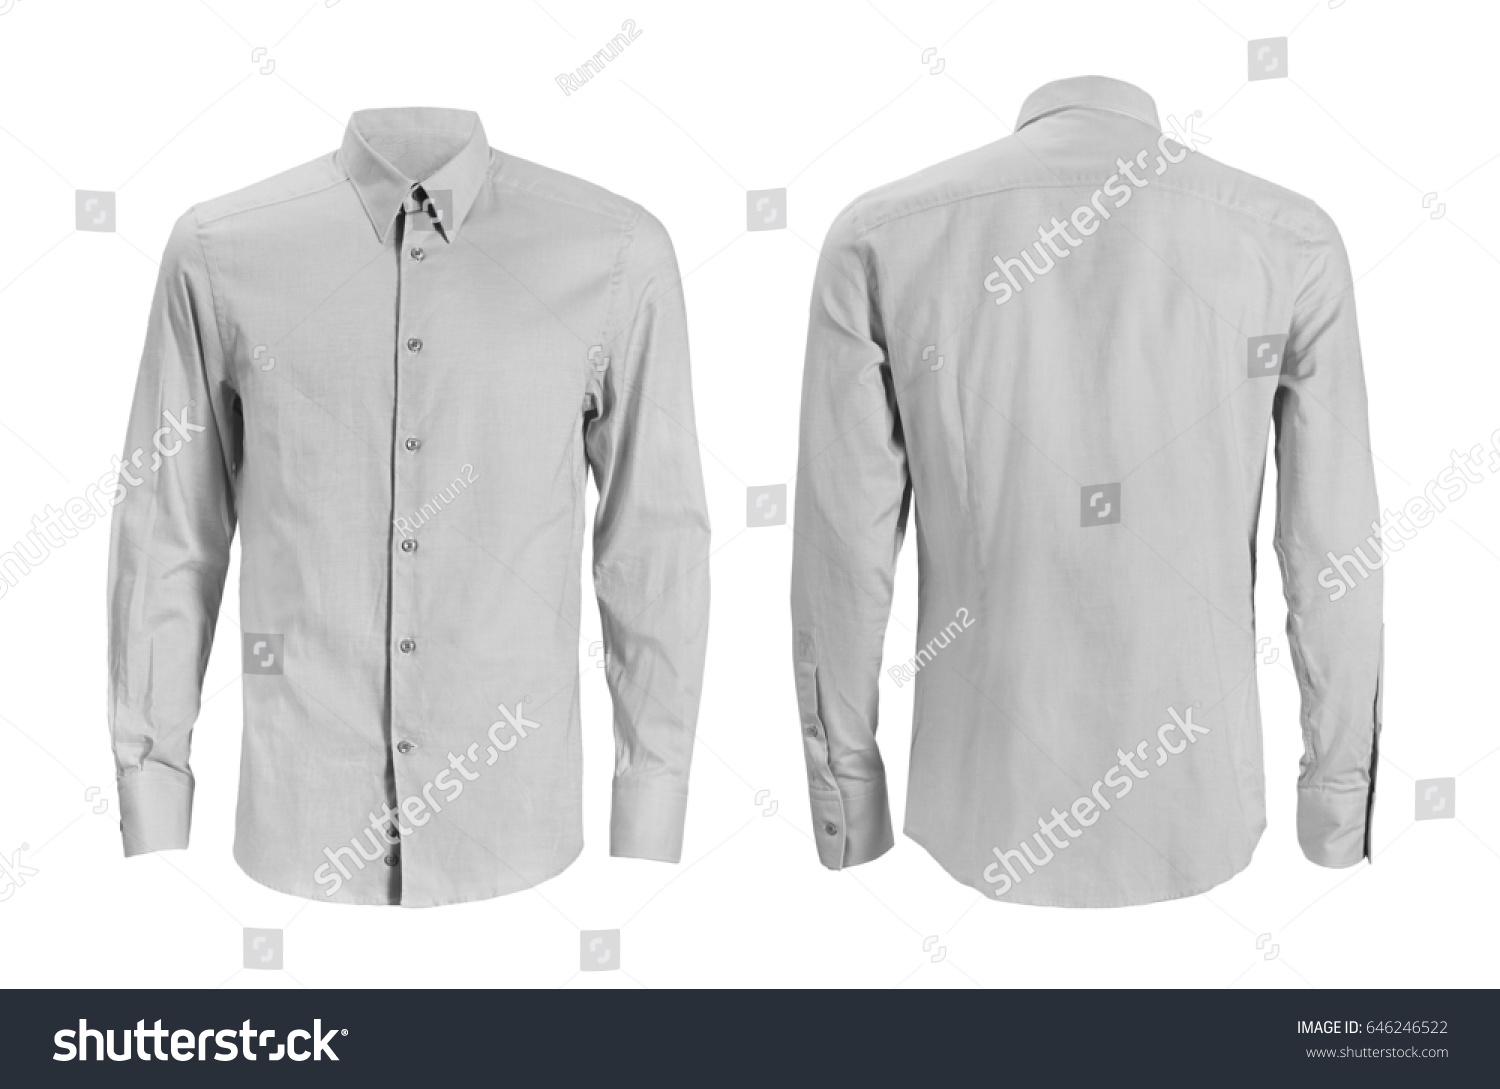 Formal shirt with button down collar isolated on white #646246522